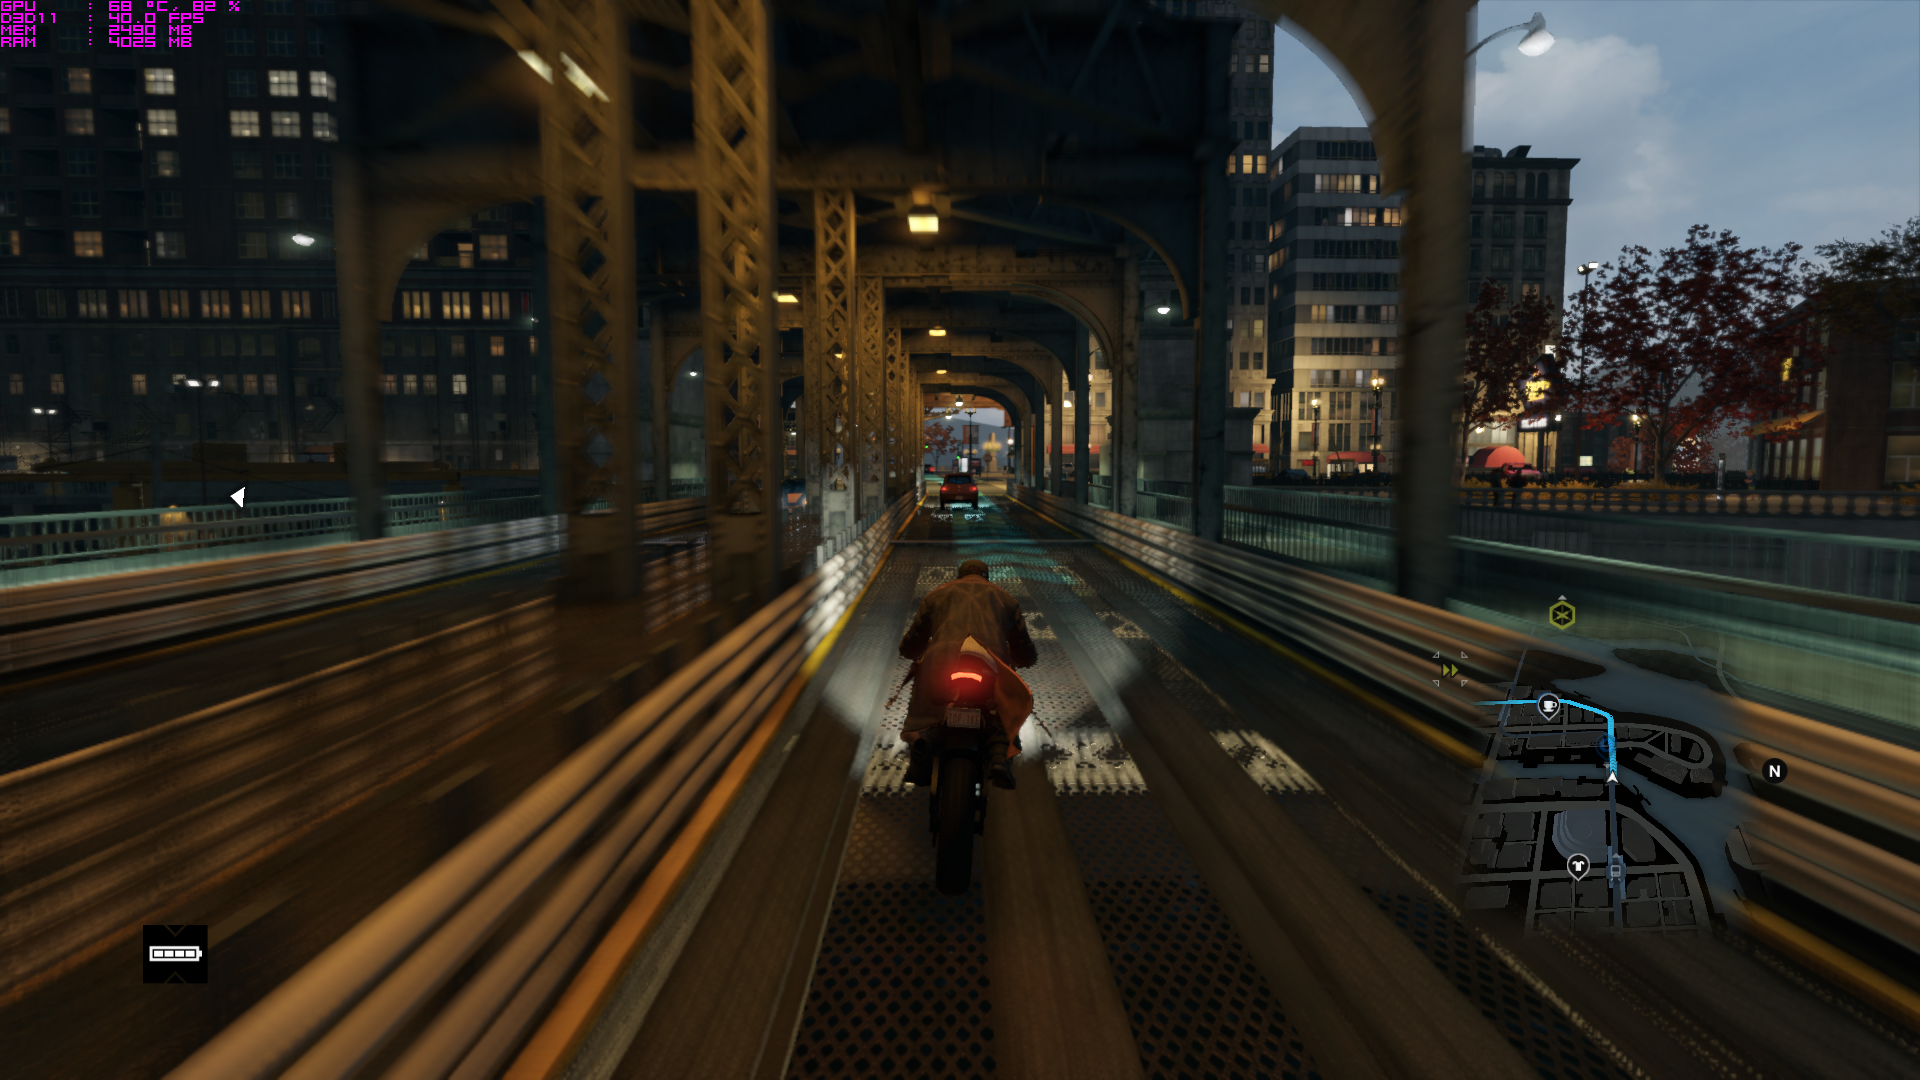 watch_dogs_2014_05_25rzs82.png